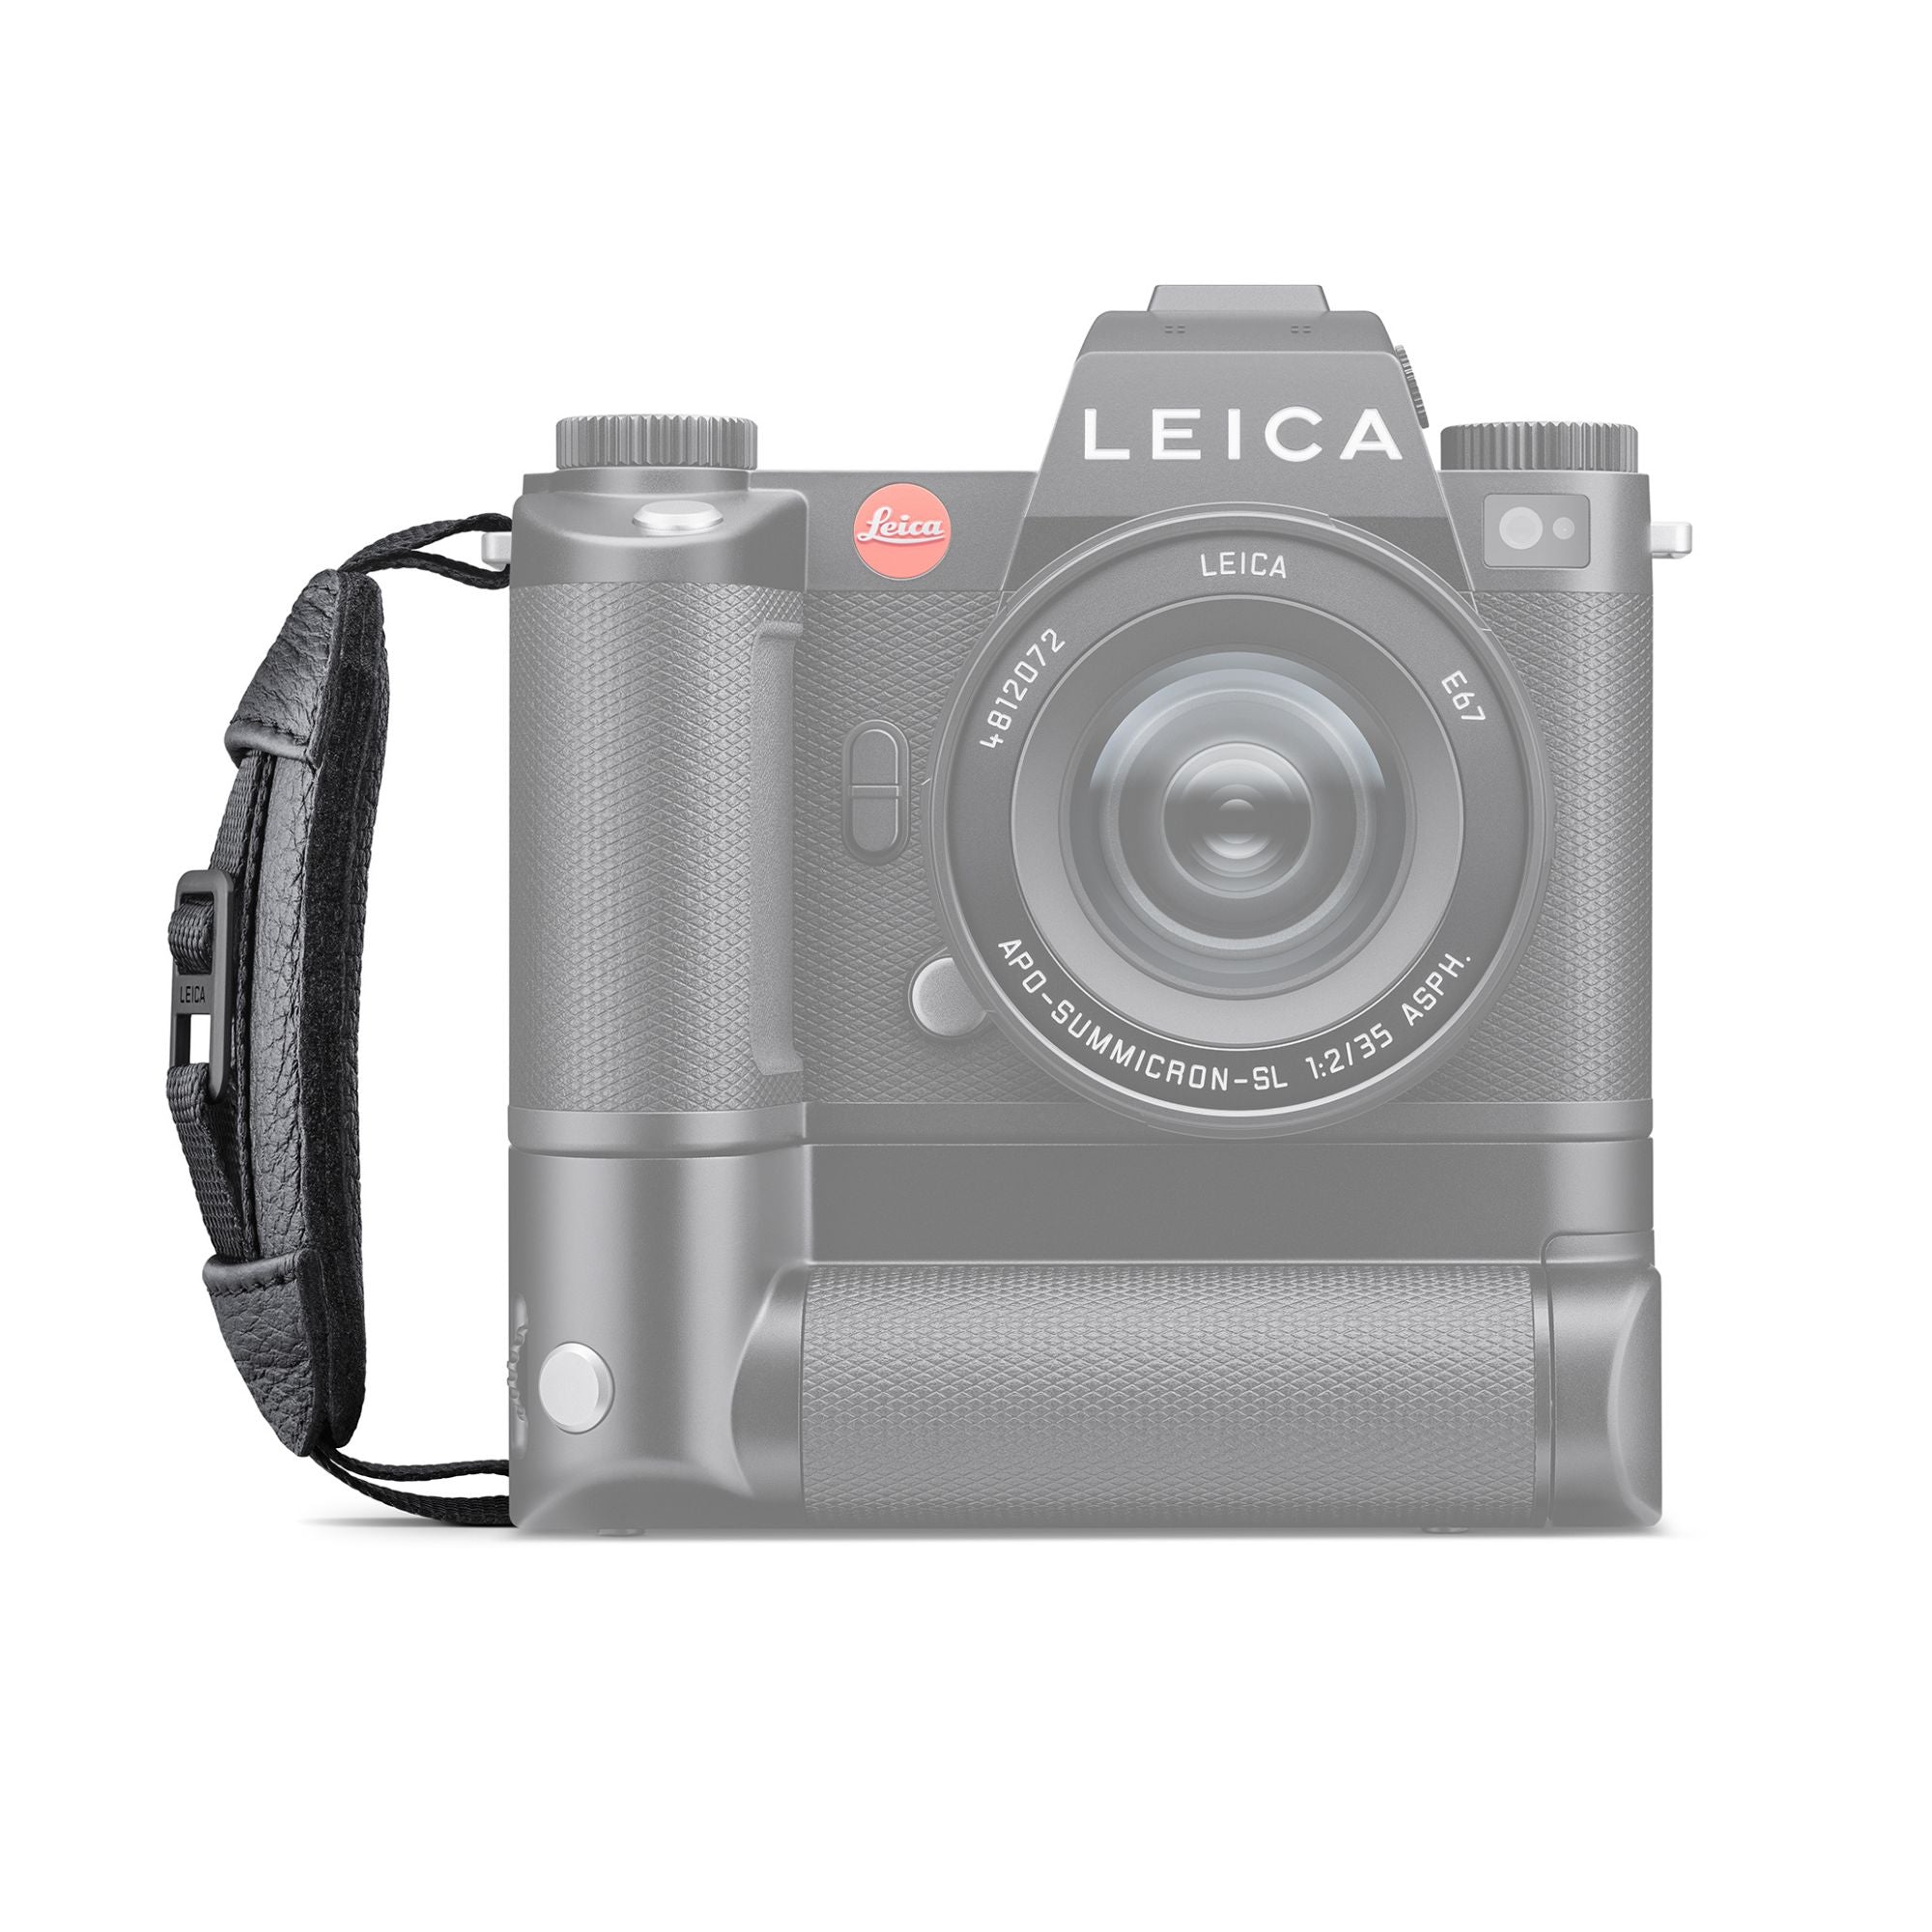 Leica Wrist Strap for HG-SCL7, Elk leather